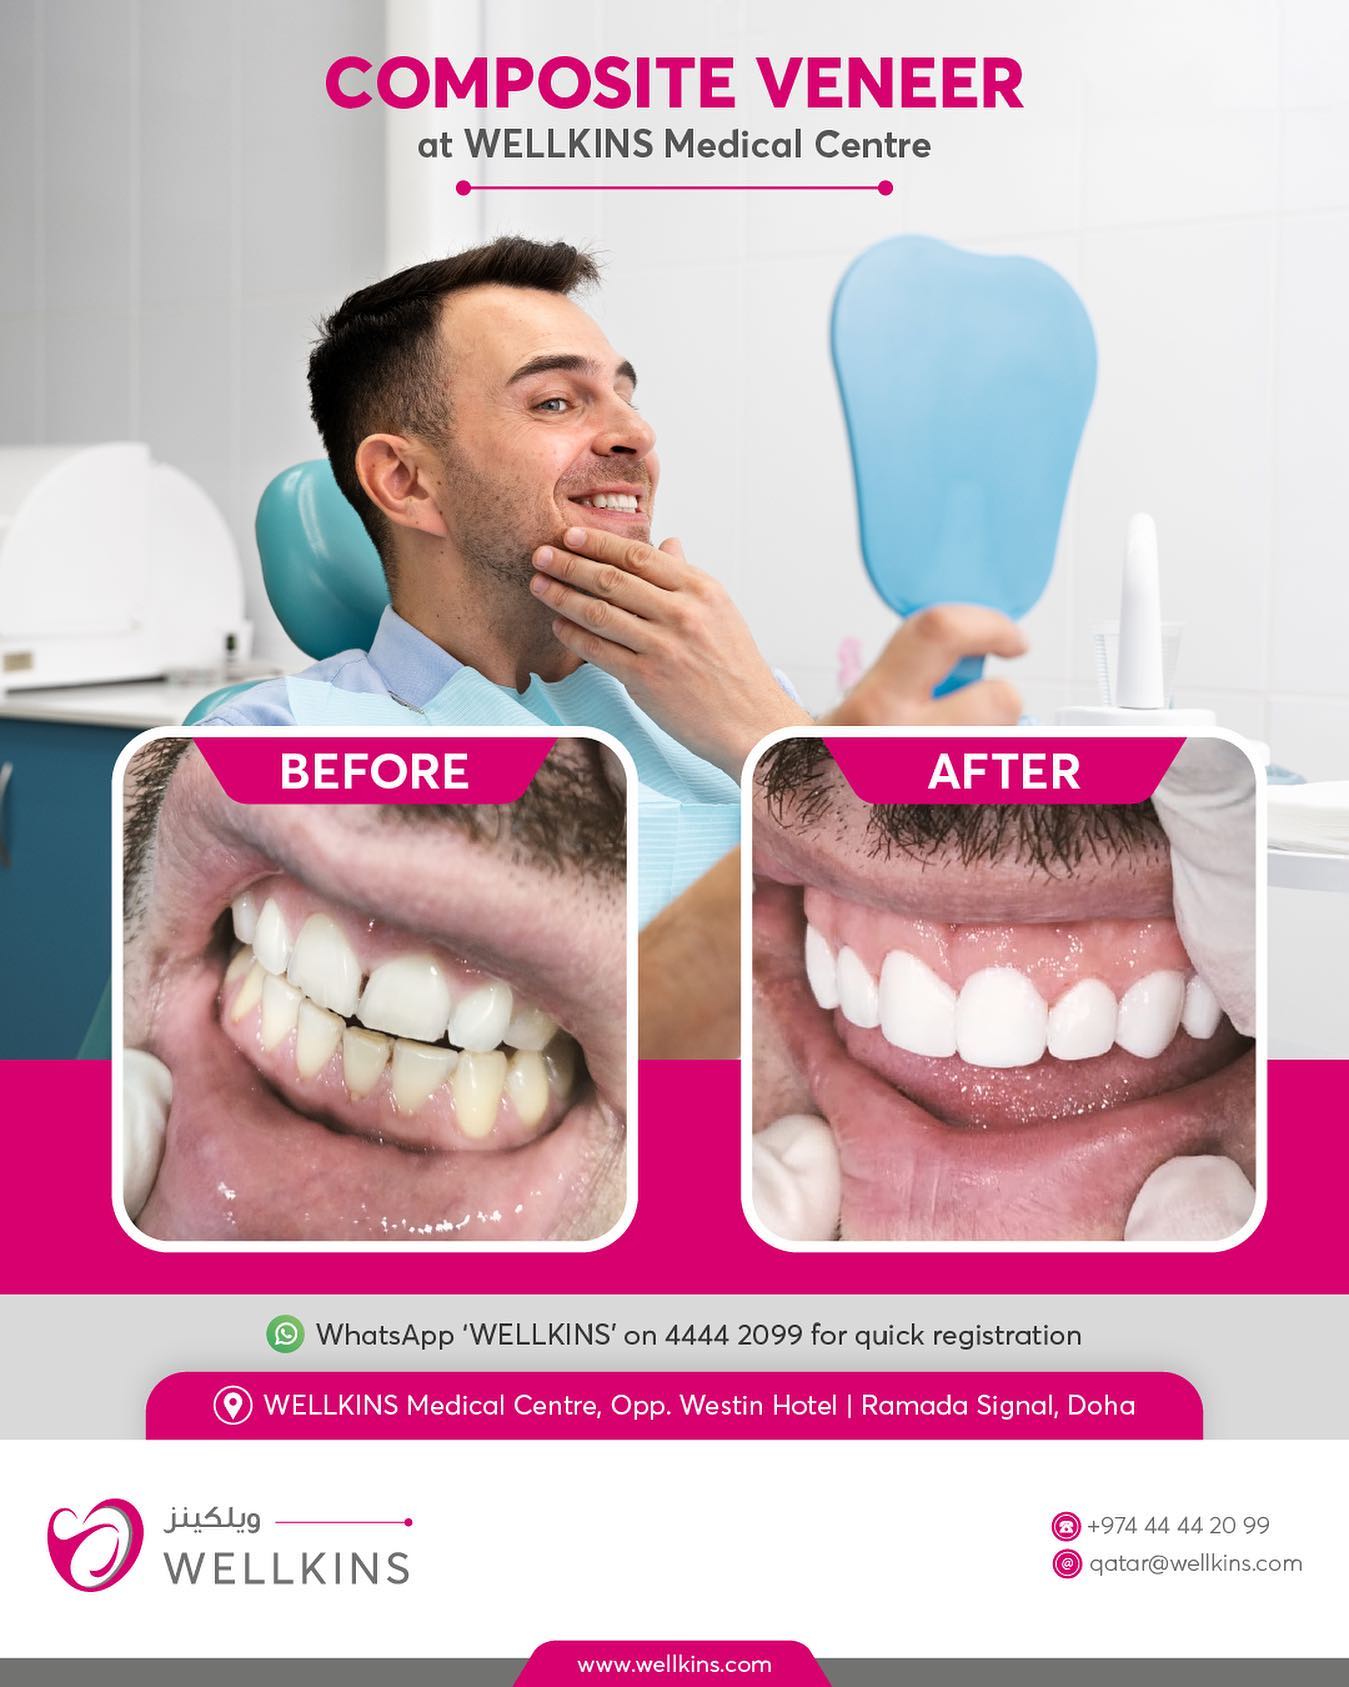 Say goodbye to unsightly gaps, chips, and stains on your teeth! Composite veneers are a quick and easy solution for a flawless smile. Our veneers will fit on your teeth perfectly, and can be completed in just one appointment. Book your consultation now and get the smile of your dreams._______________________________
To learn more about #WELLKINSQATAR and our services, kindly visit our website www.wellkins.com
Helpline: 4444 2099
_______________________________
#Wellkinsqatar #wellkins #medicalcentre #Qatar2022 #dentalveneers